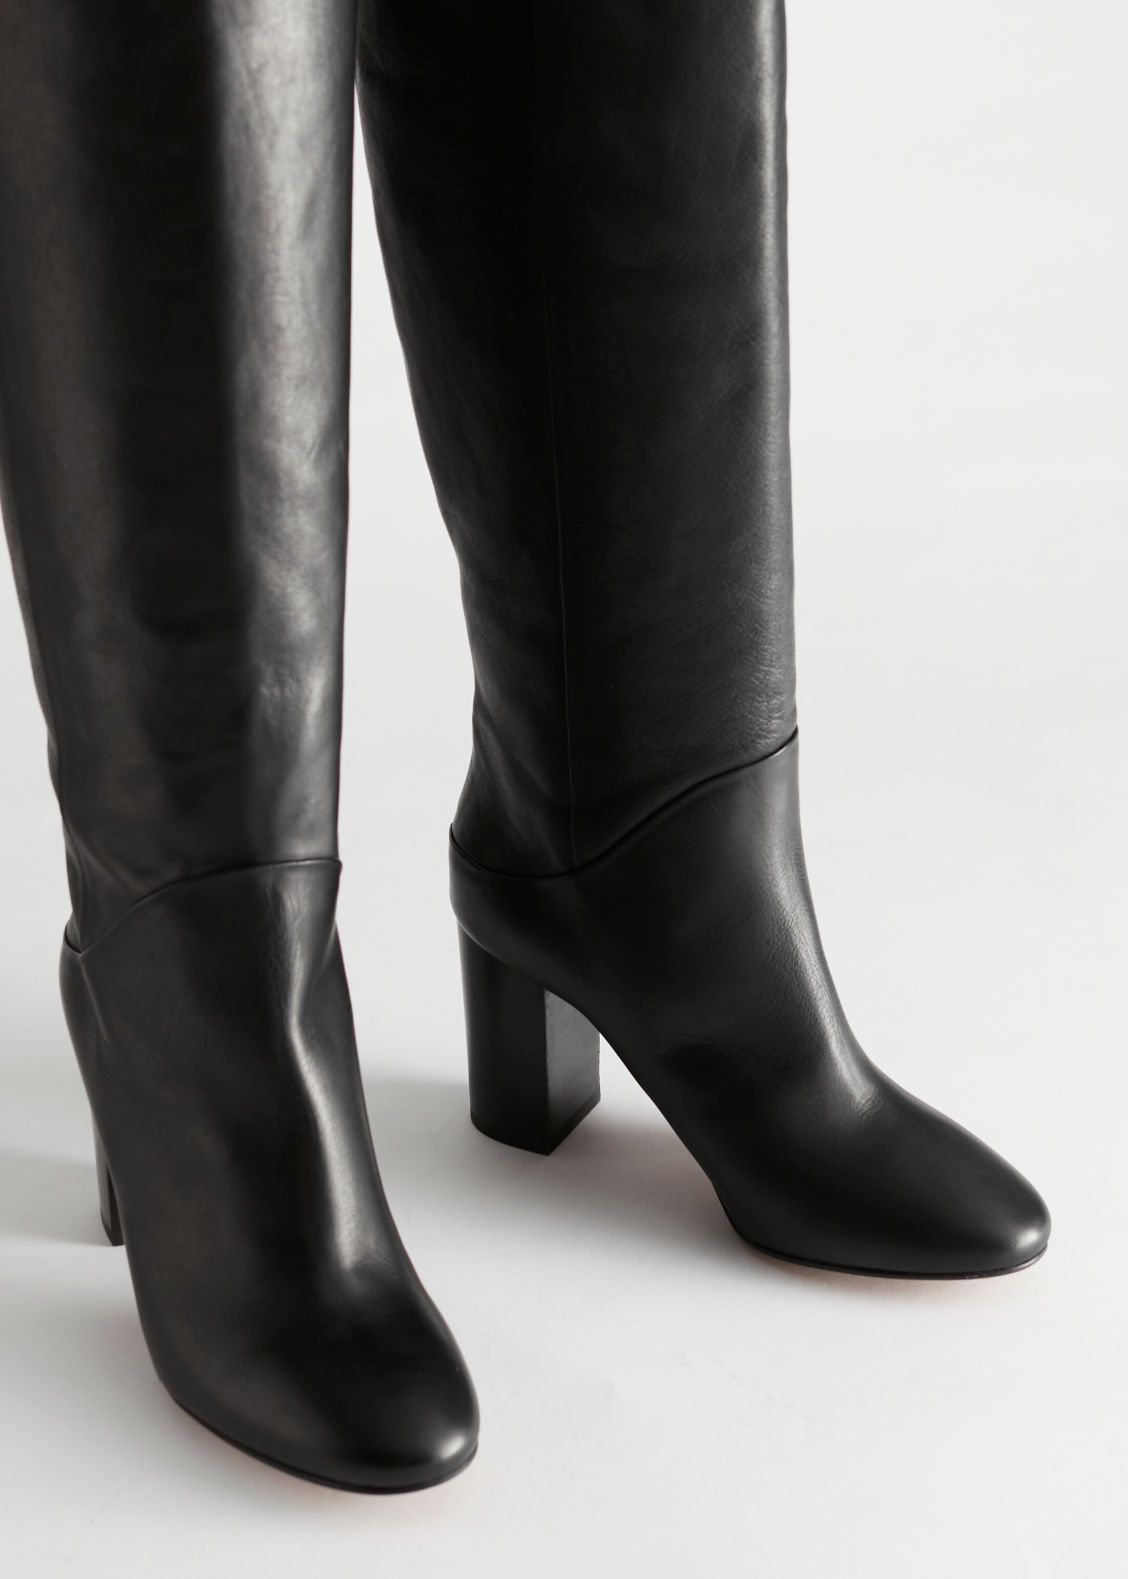 Chrome Free Tanned Leather Knee High Boots | & Other Stories (EU + UK)